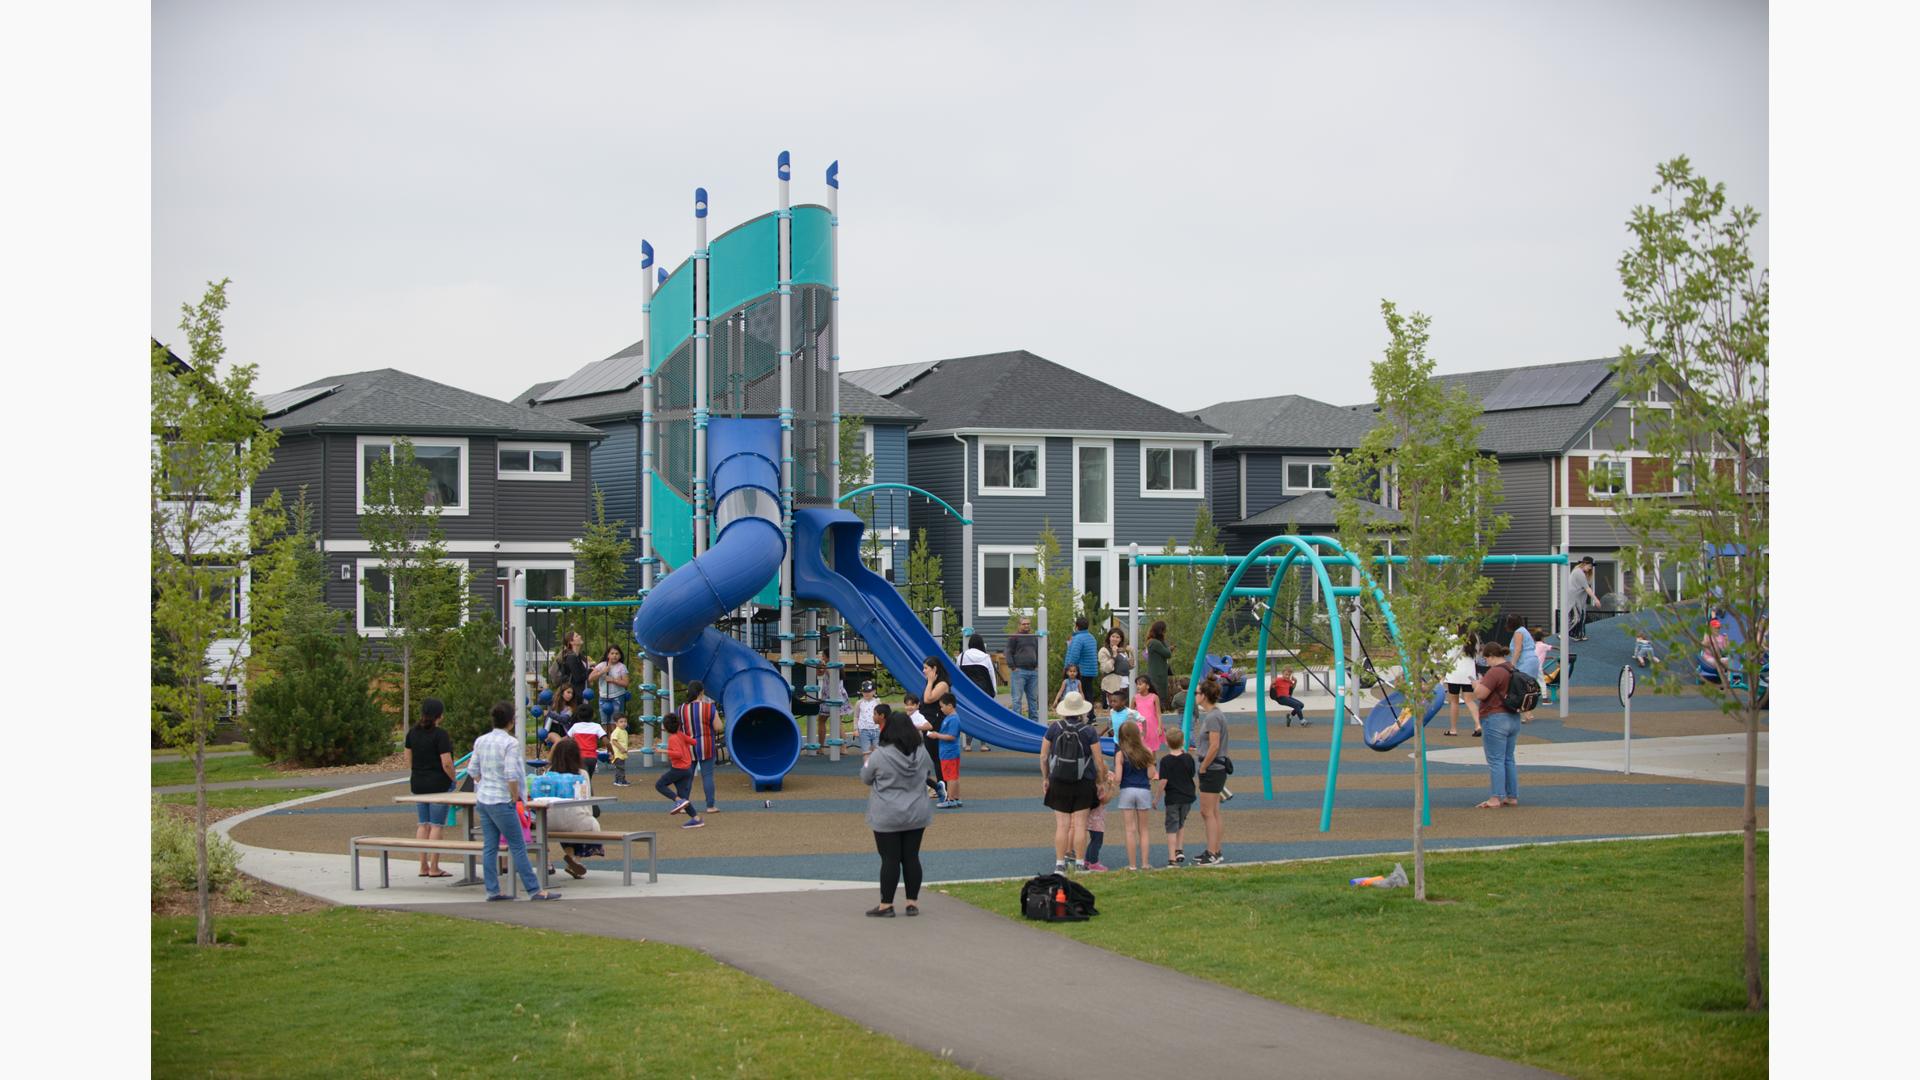 Seton Playground Calgory, AB Canada nicknamed Elsa’s Tower features the Super Netplex® and slide down the Double Swoosh Slide,  We-Saw®,  the Chill® Spinner and the Oodle® Swing. As well as a Smart Play Motion for kids ages 2 to 5.